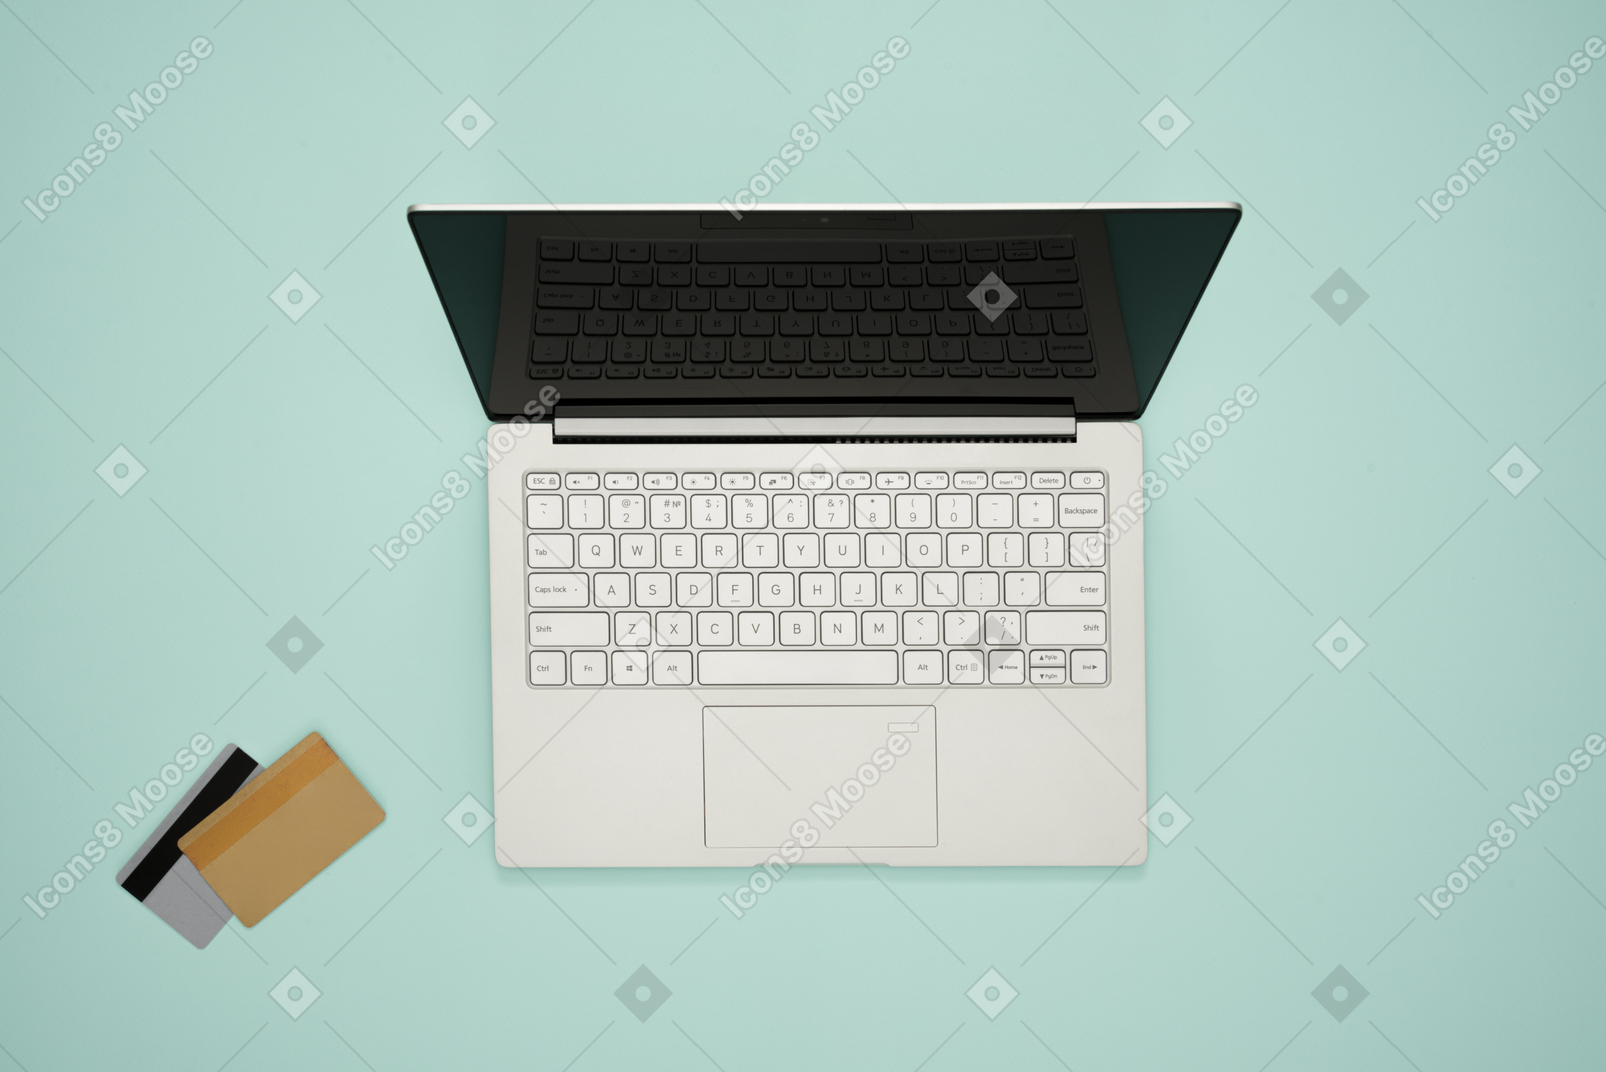 Laptop and credit cards on a turquoise background